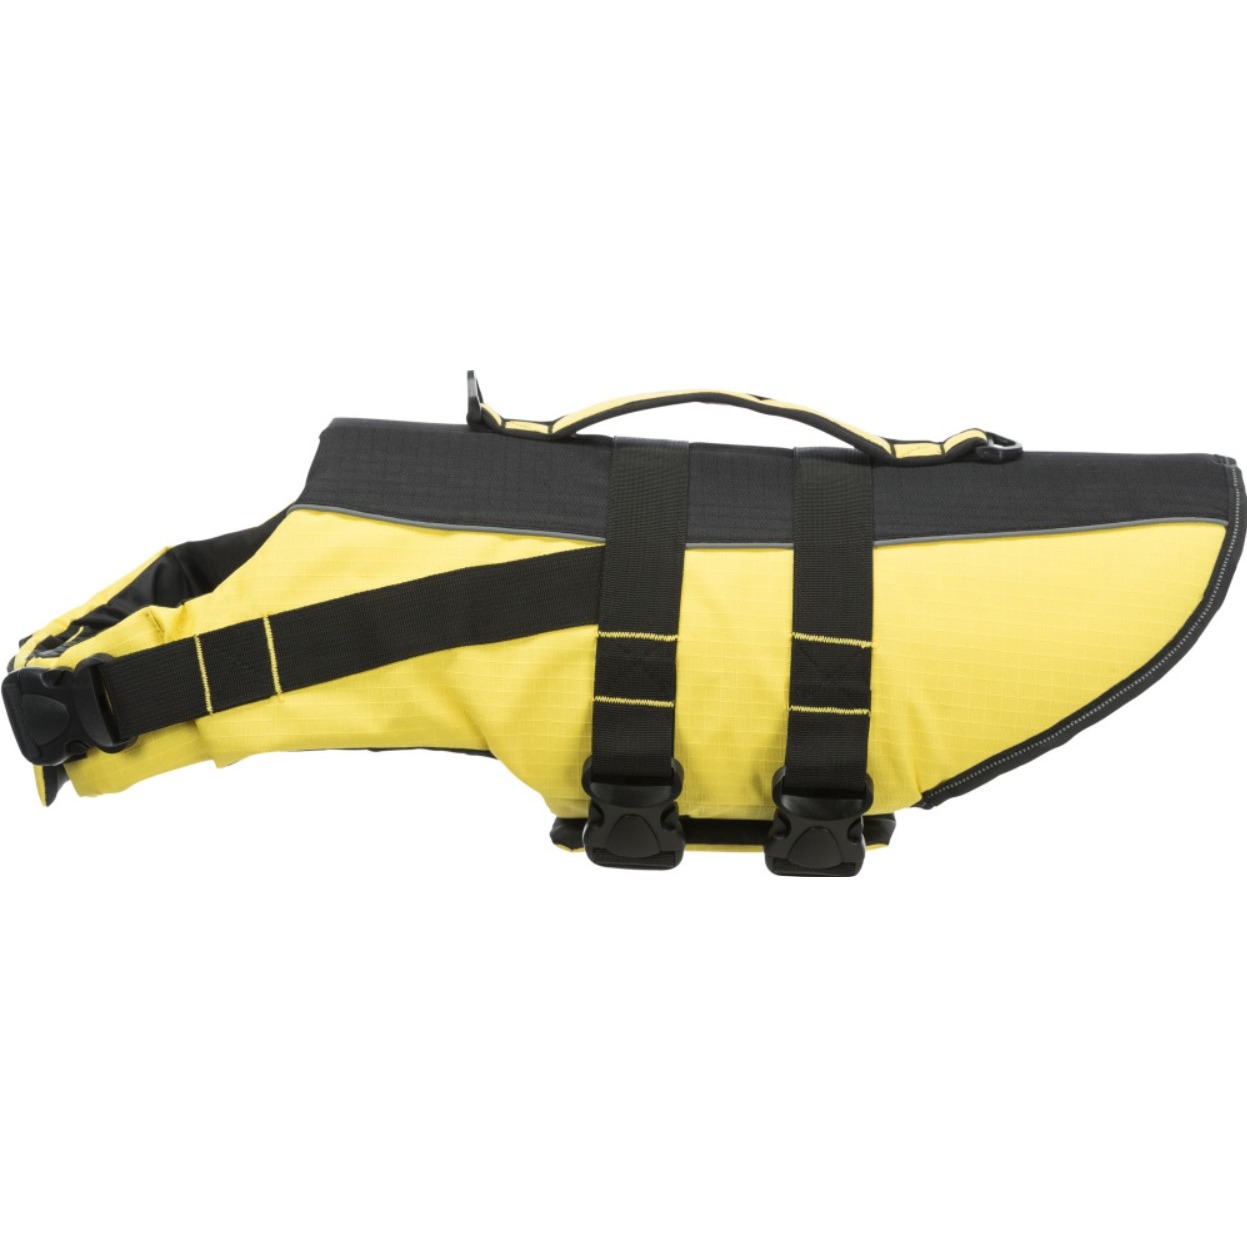 Trixie Life Vest For Dogs Yellow & Black